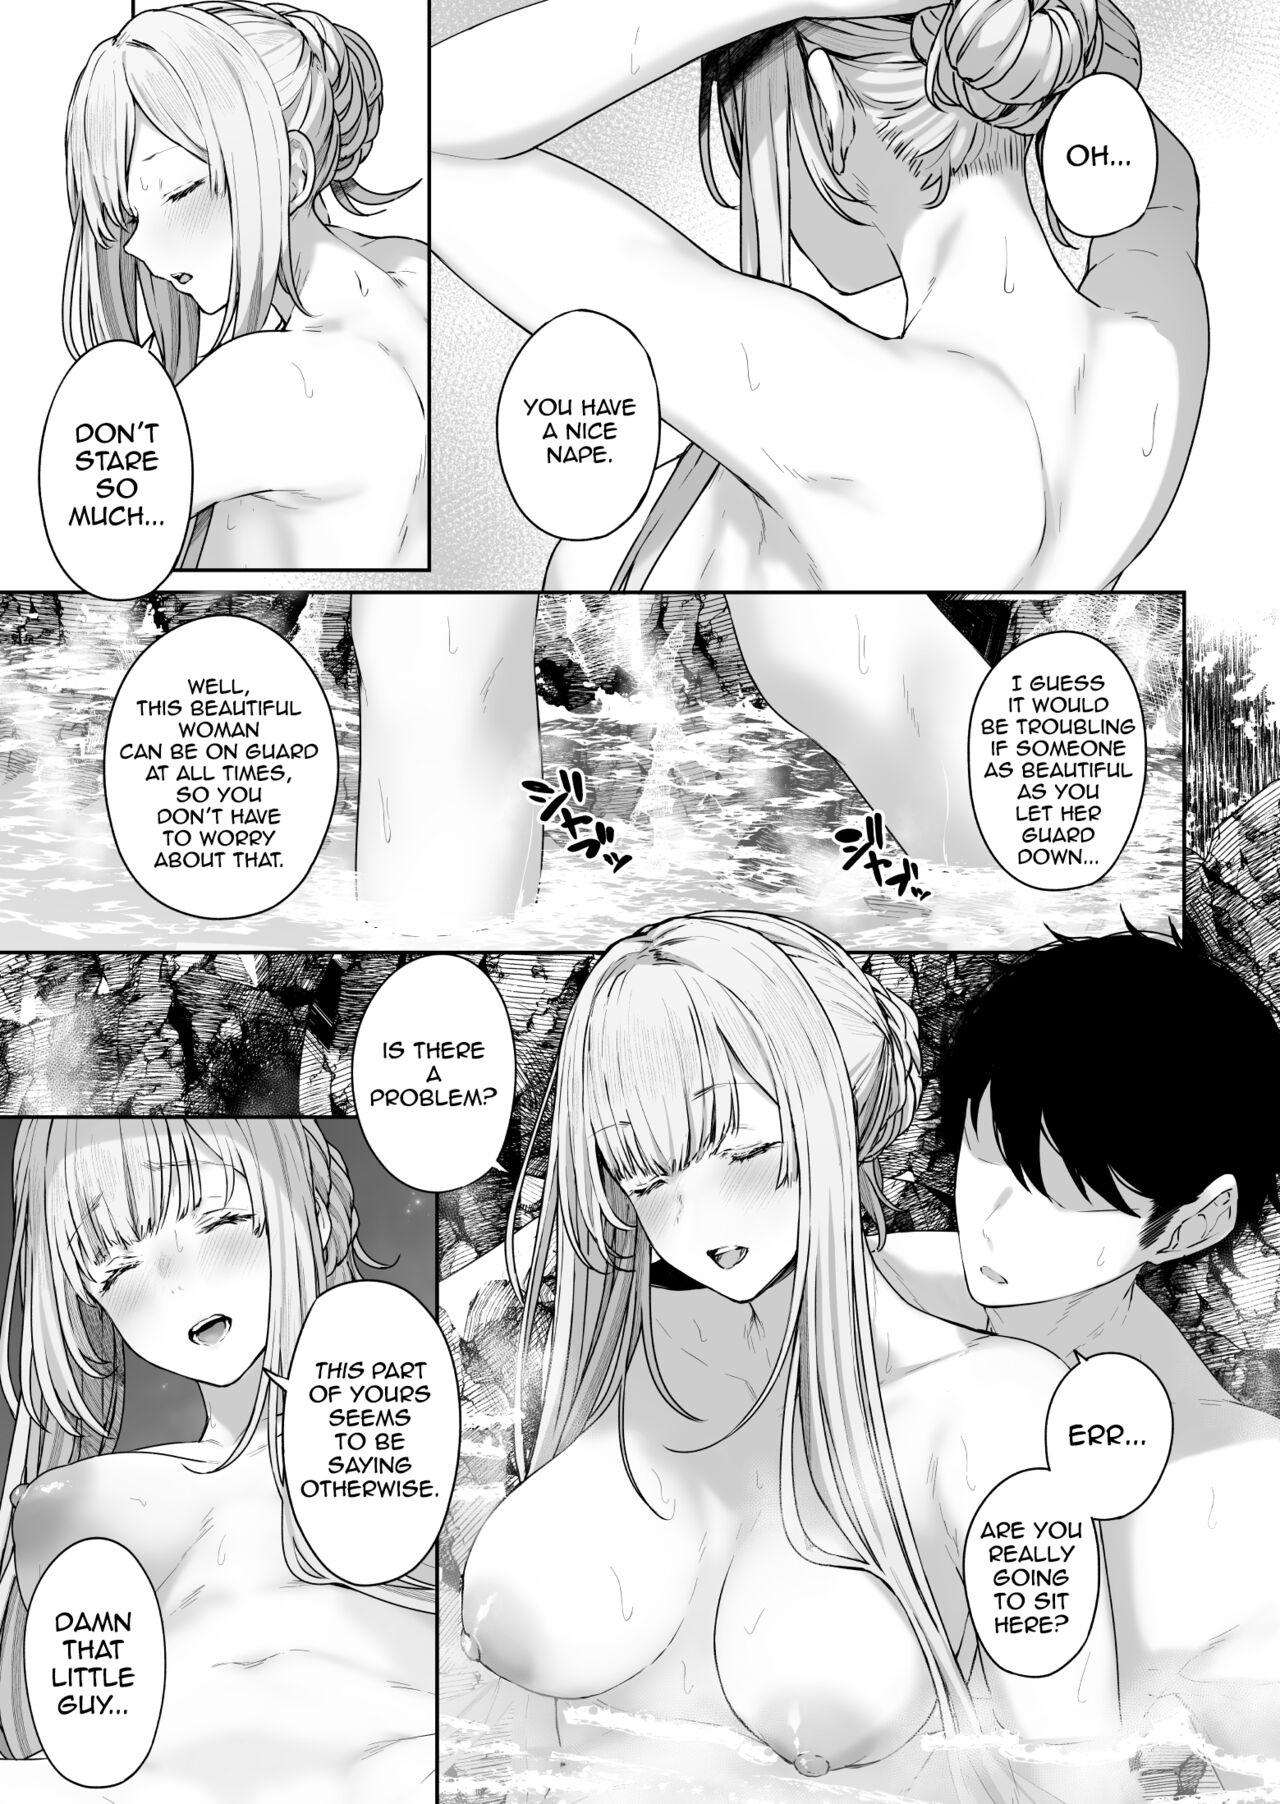 Pick Up Hangyaku Onsen 2 | Hot Springs DEFY 2 - Girls frontline Chacal - Page 12